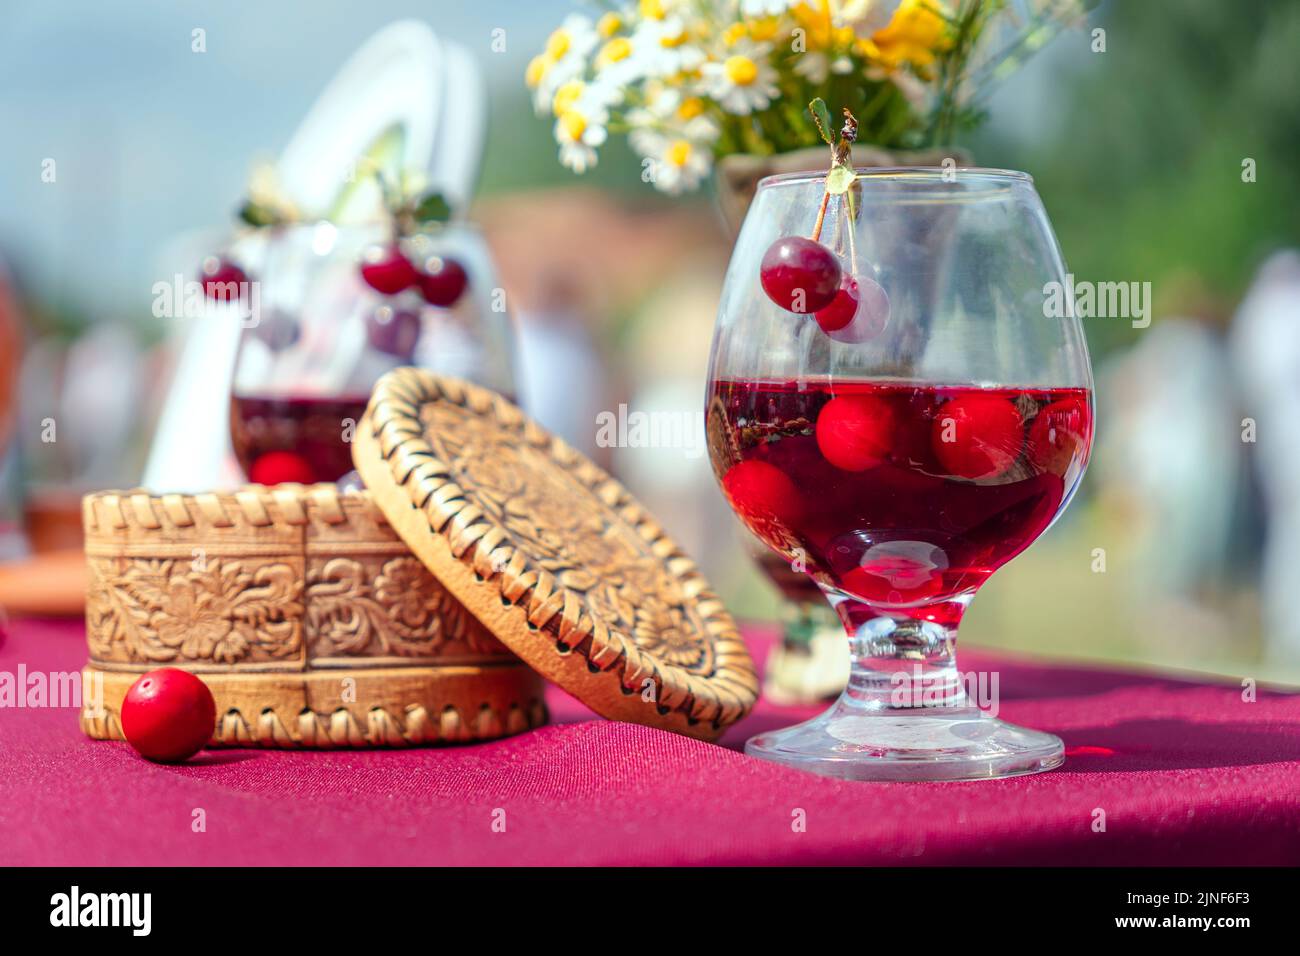 sweet cherry tincture in a glass with berries on the table and a wooden box. Alcoholic National Beverage Stock Photo